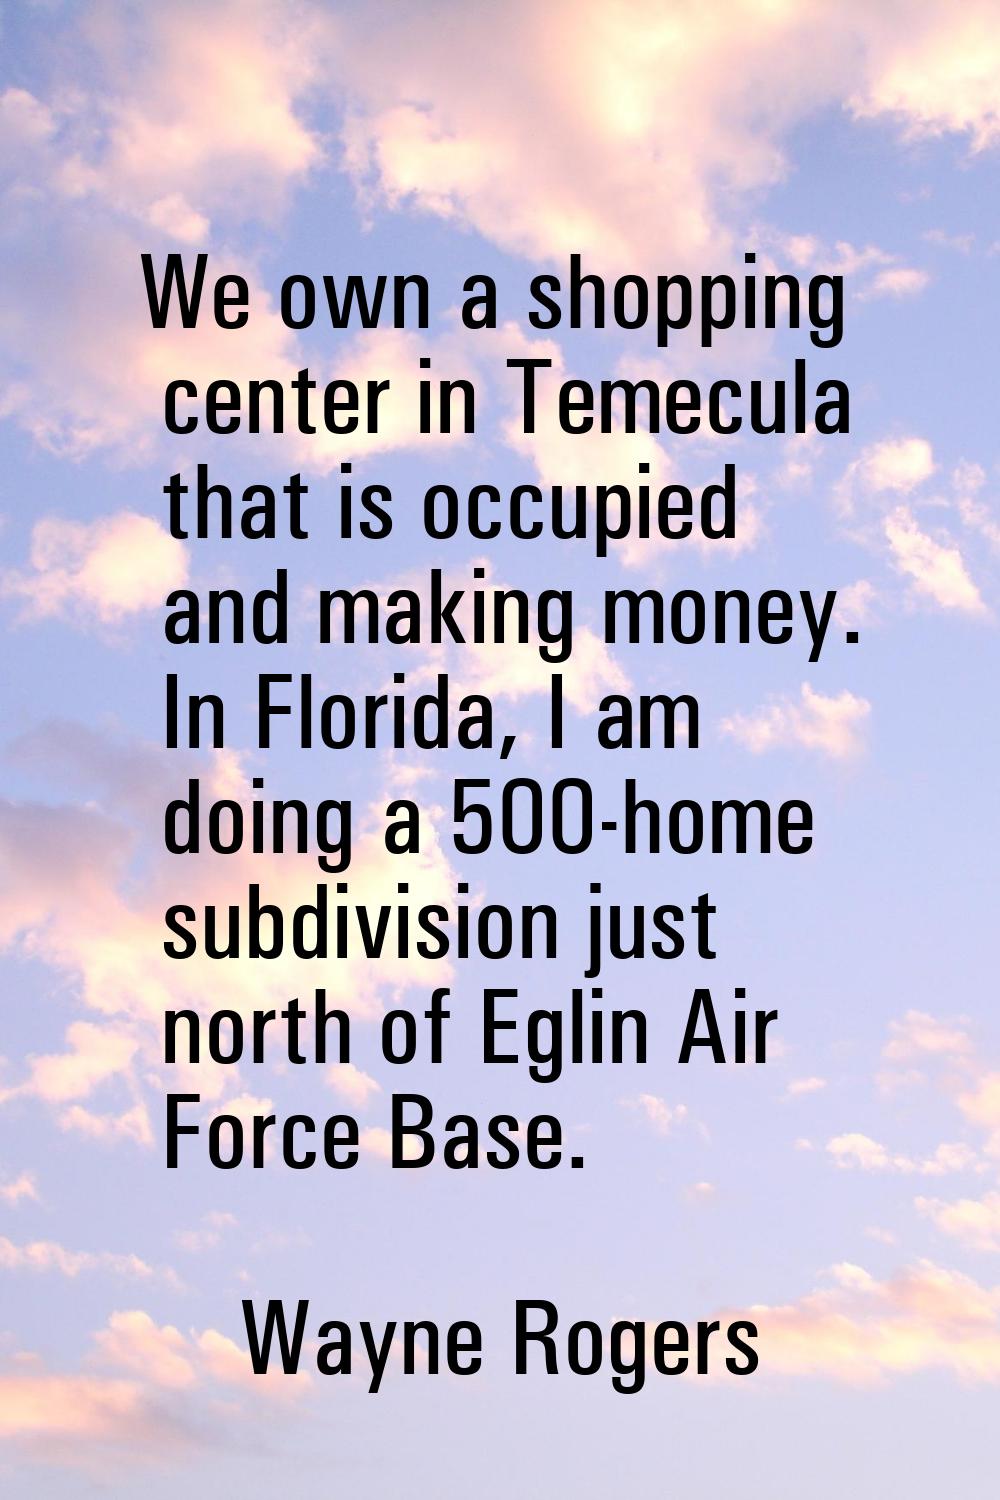 We own a shopping center in Temecula that is occupied and making money. In Florida, I am doing a 50